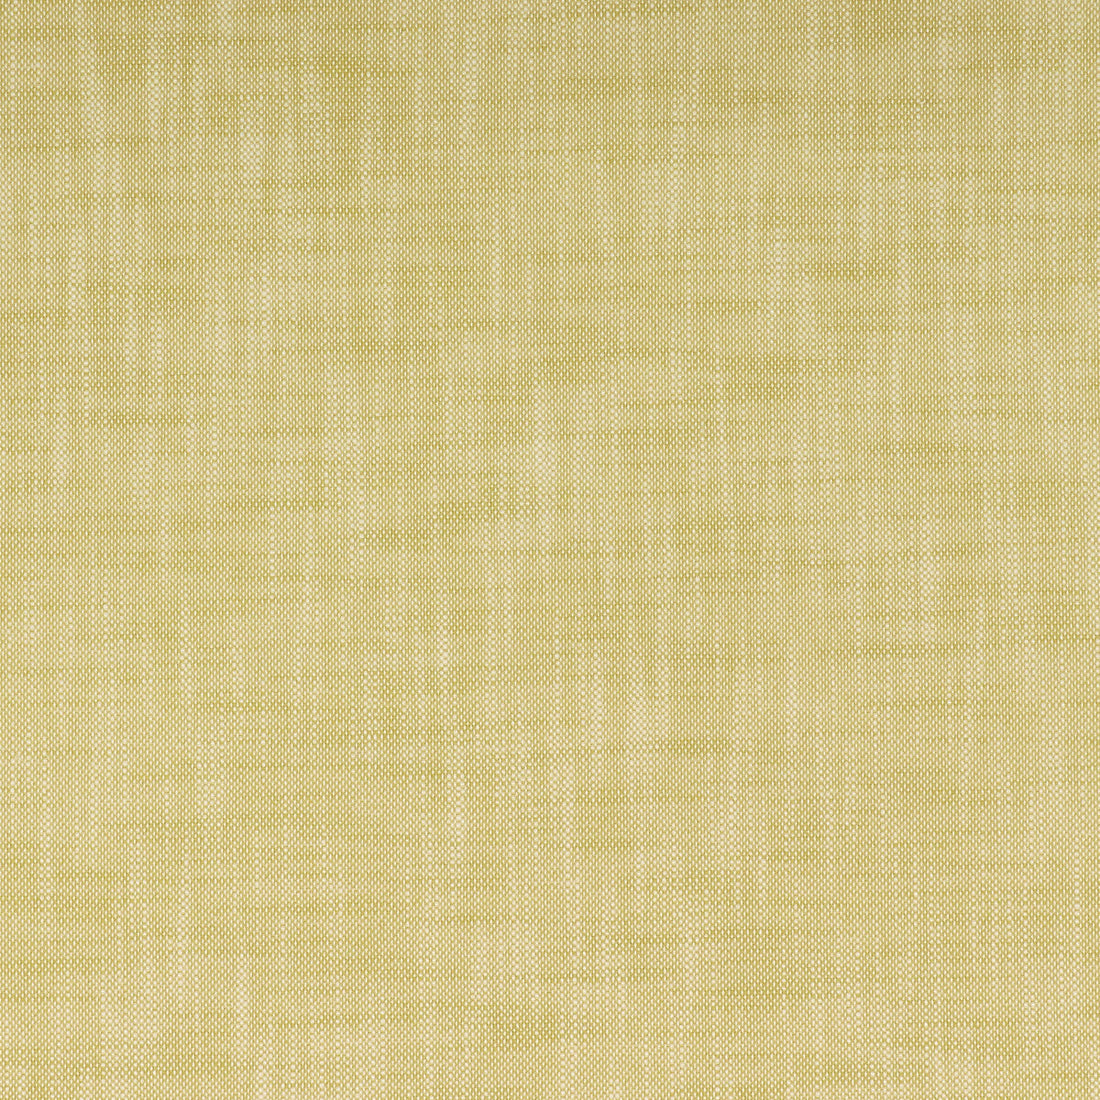 Kravet Smart fabric in 35517-23 color - pattern 35517.23.0 - by Kravet Smart in the Inside Out Performance Fabrics collection